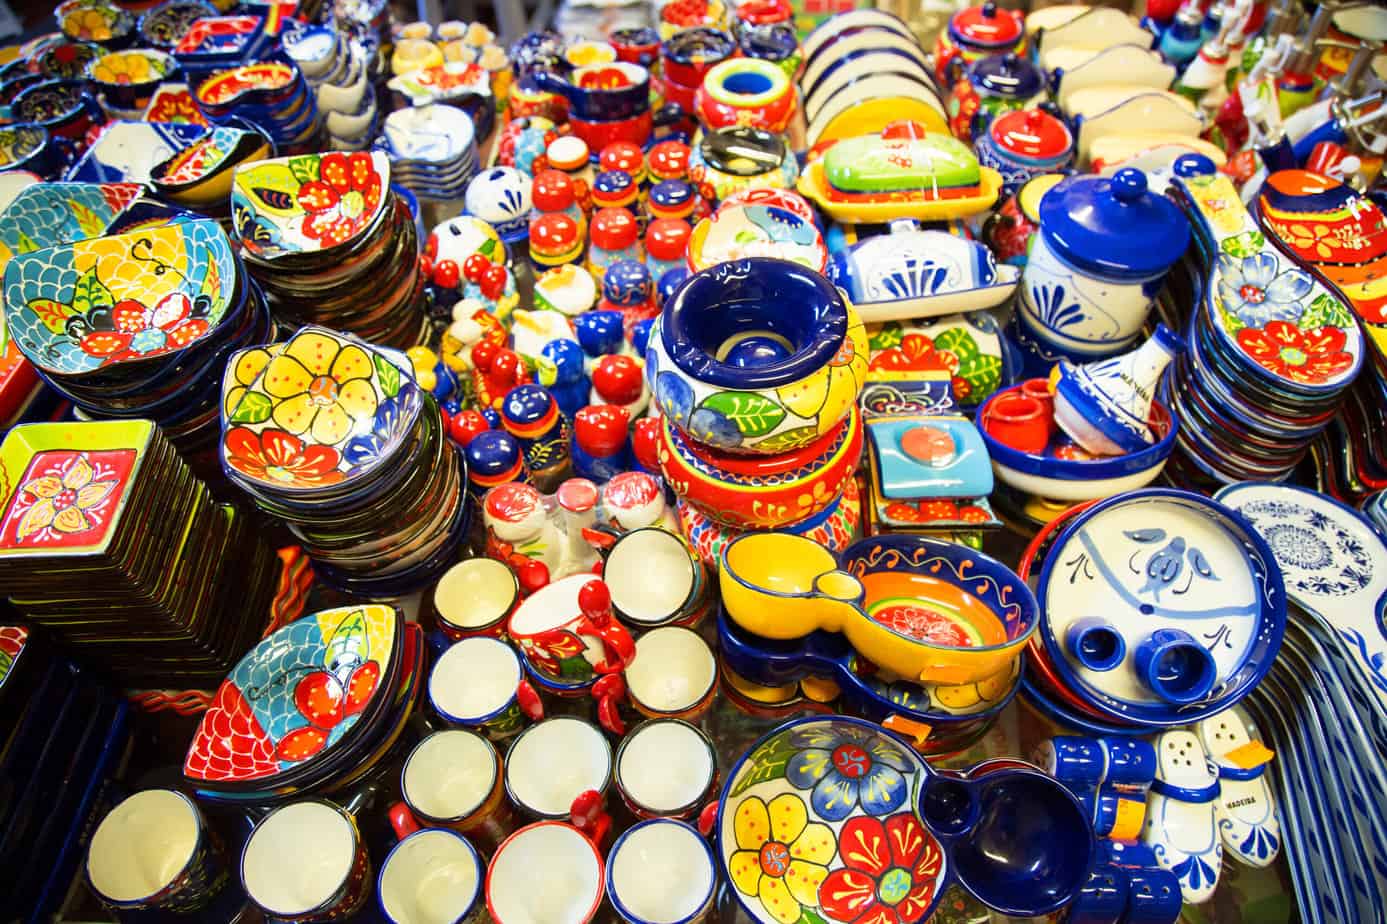 A colorful display of Madeira pottery souvenirs.